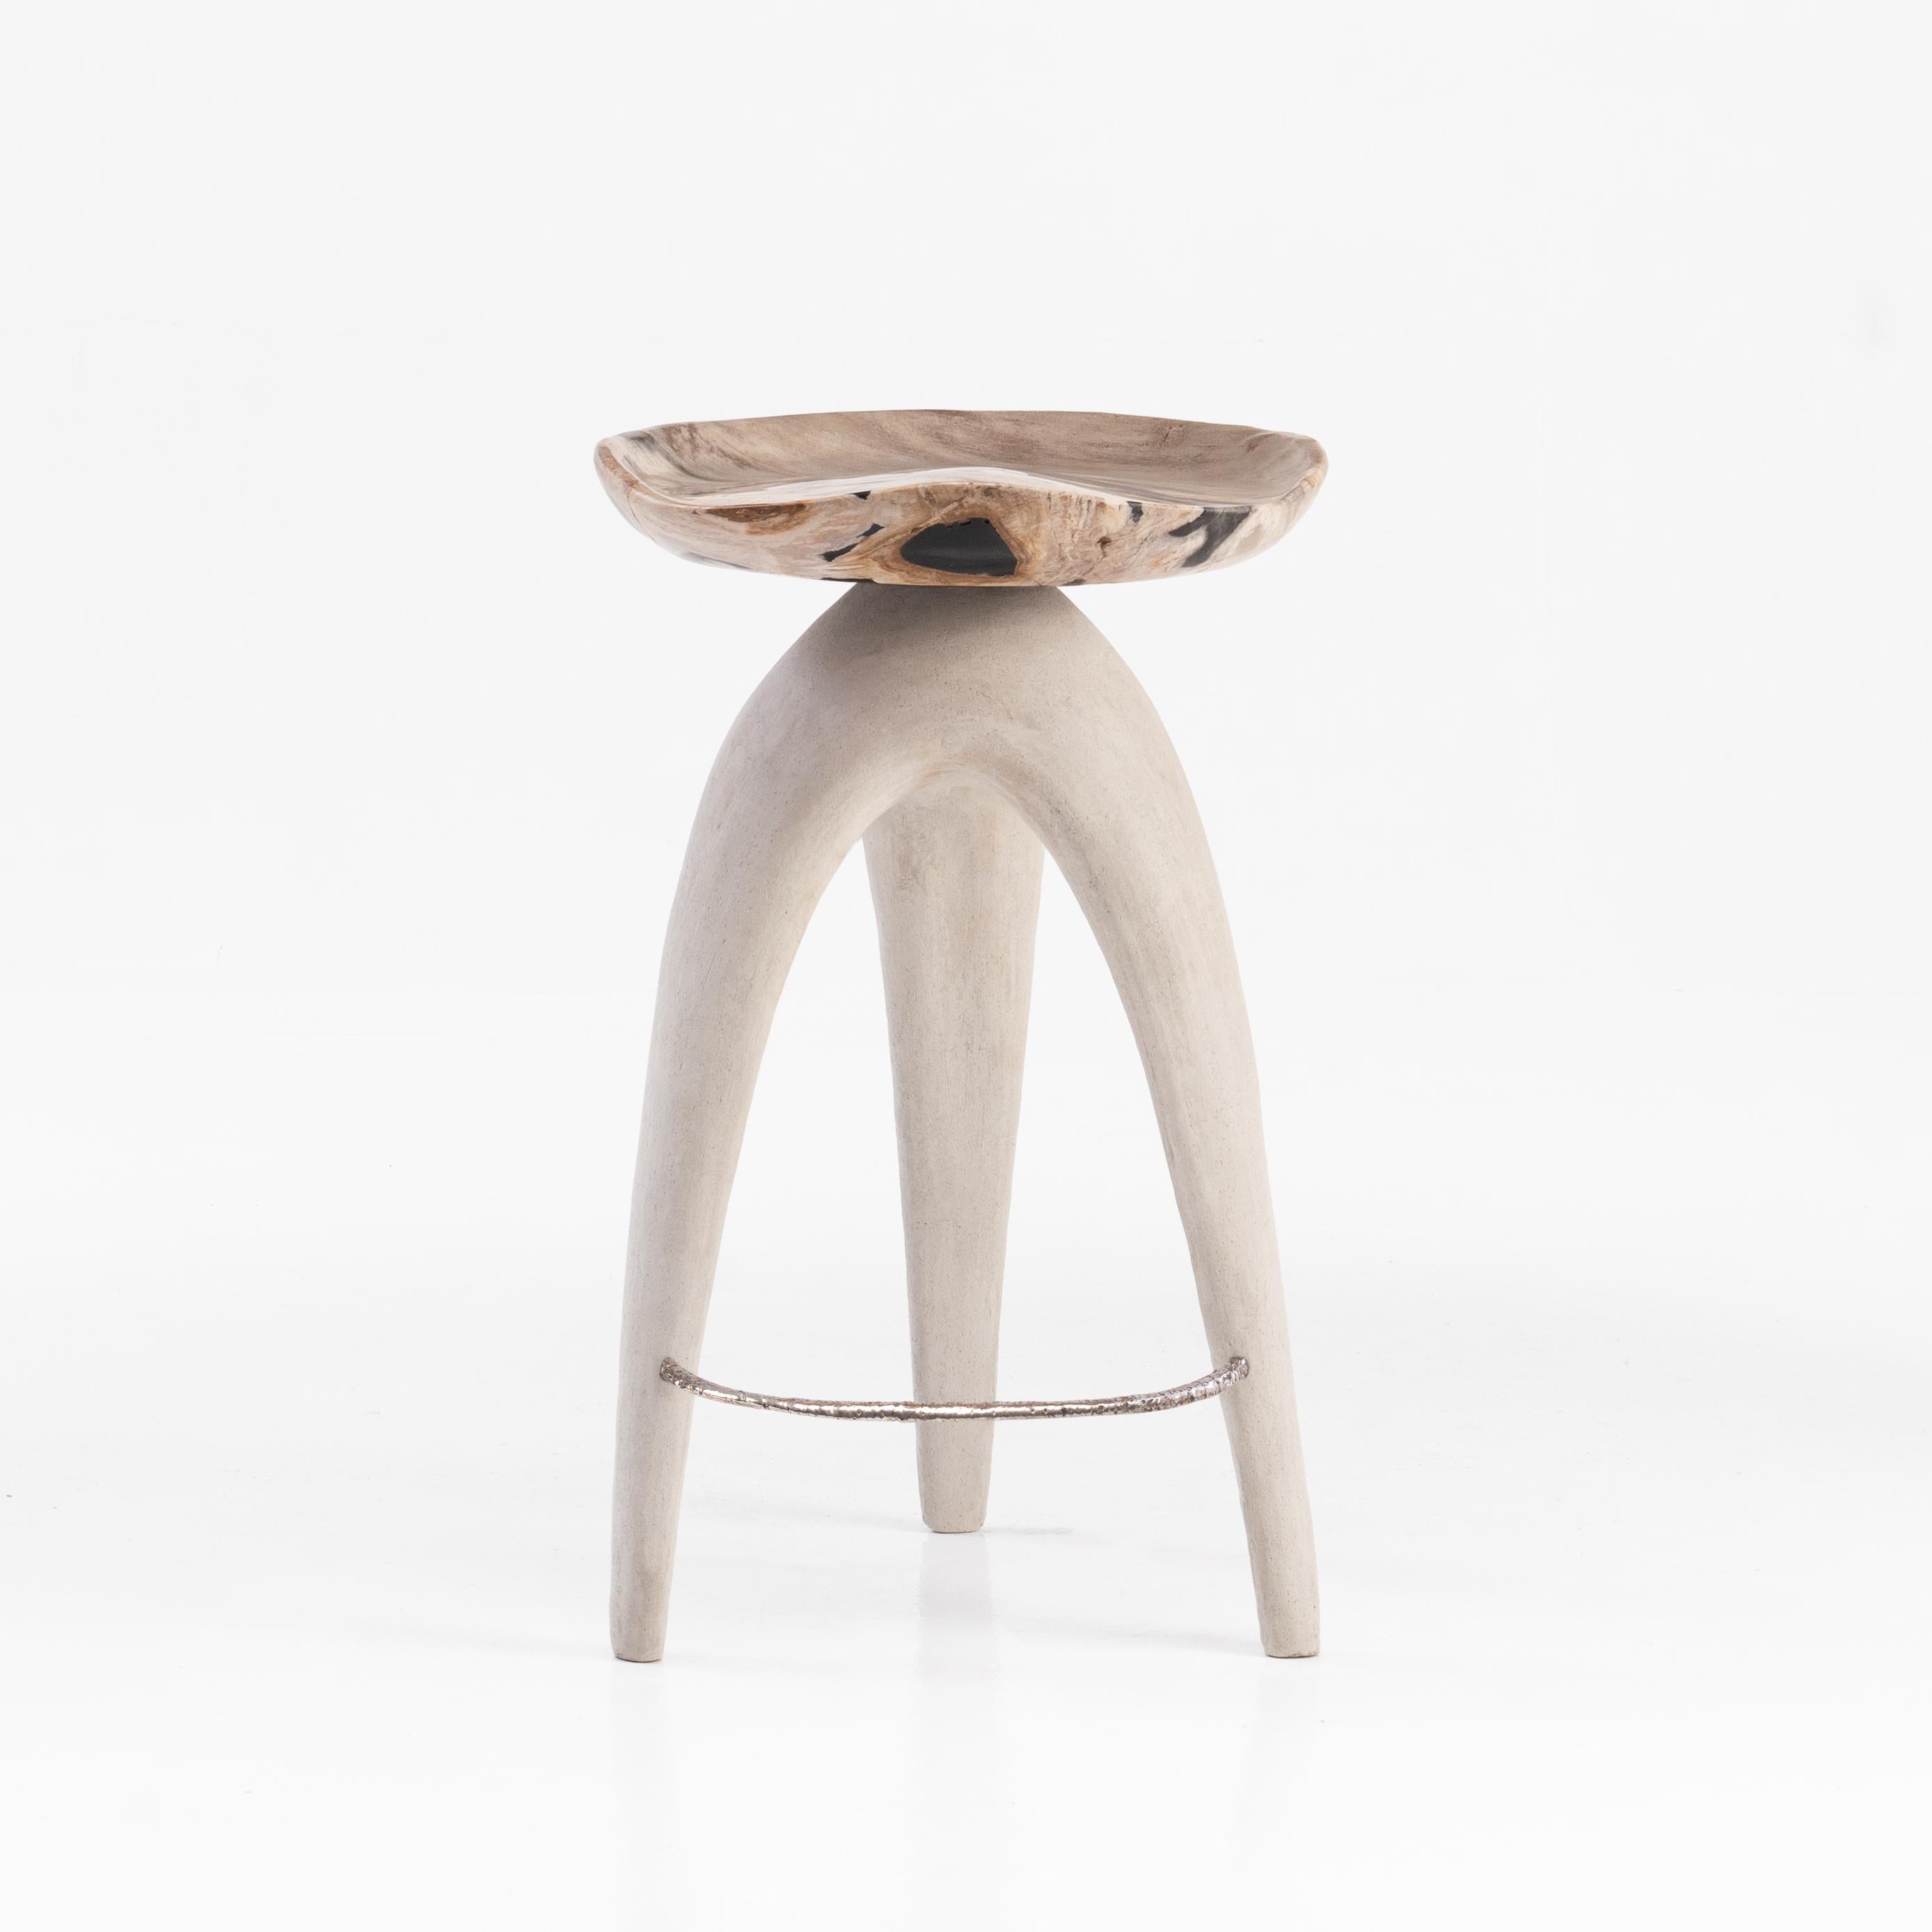 Bone Bermuda Triangle Counter Stool by Odditi
Dimensions: D 42 x H 65 cm
Materials: Petrified Wood Sculpted Seat, Limestone Composite, Steel Base

The ‘Bermuda Triangle’ sculptural stool features a solid hand-carved petrified wood saddle seat,